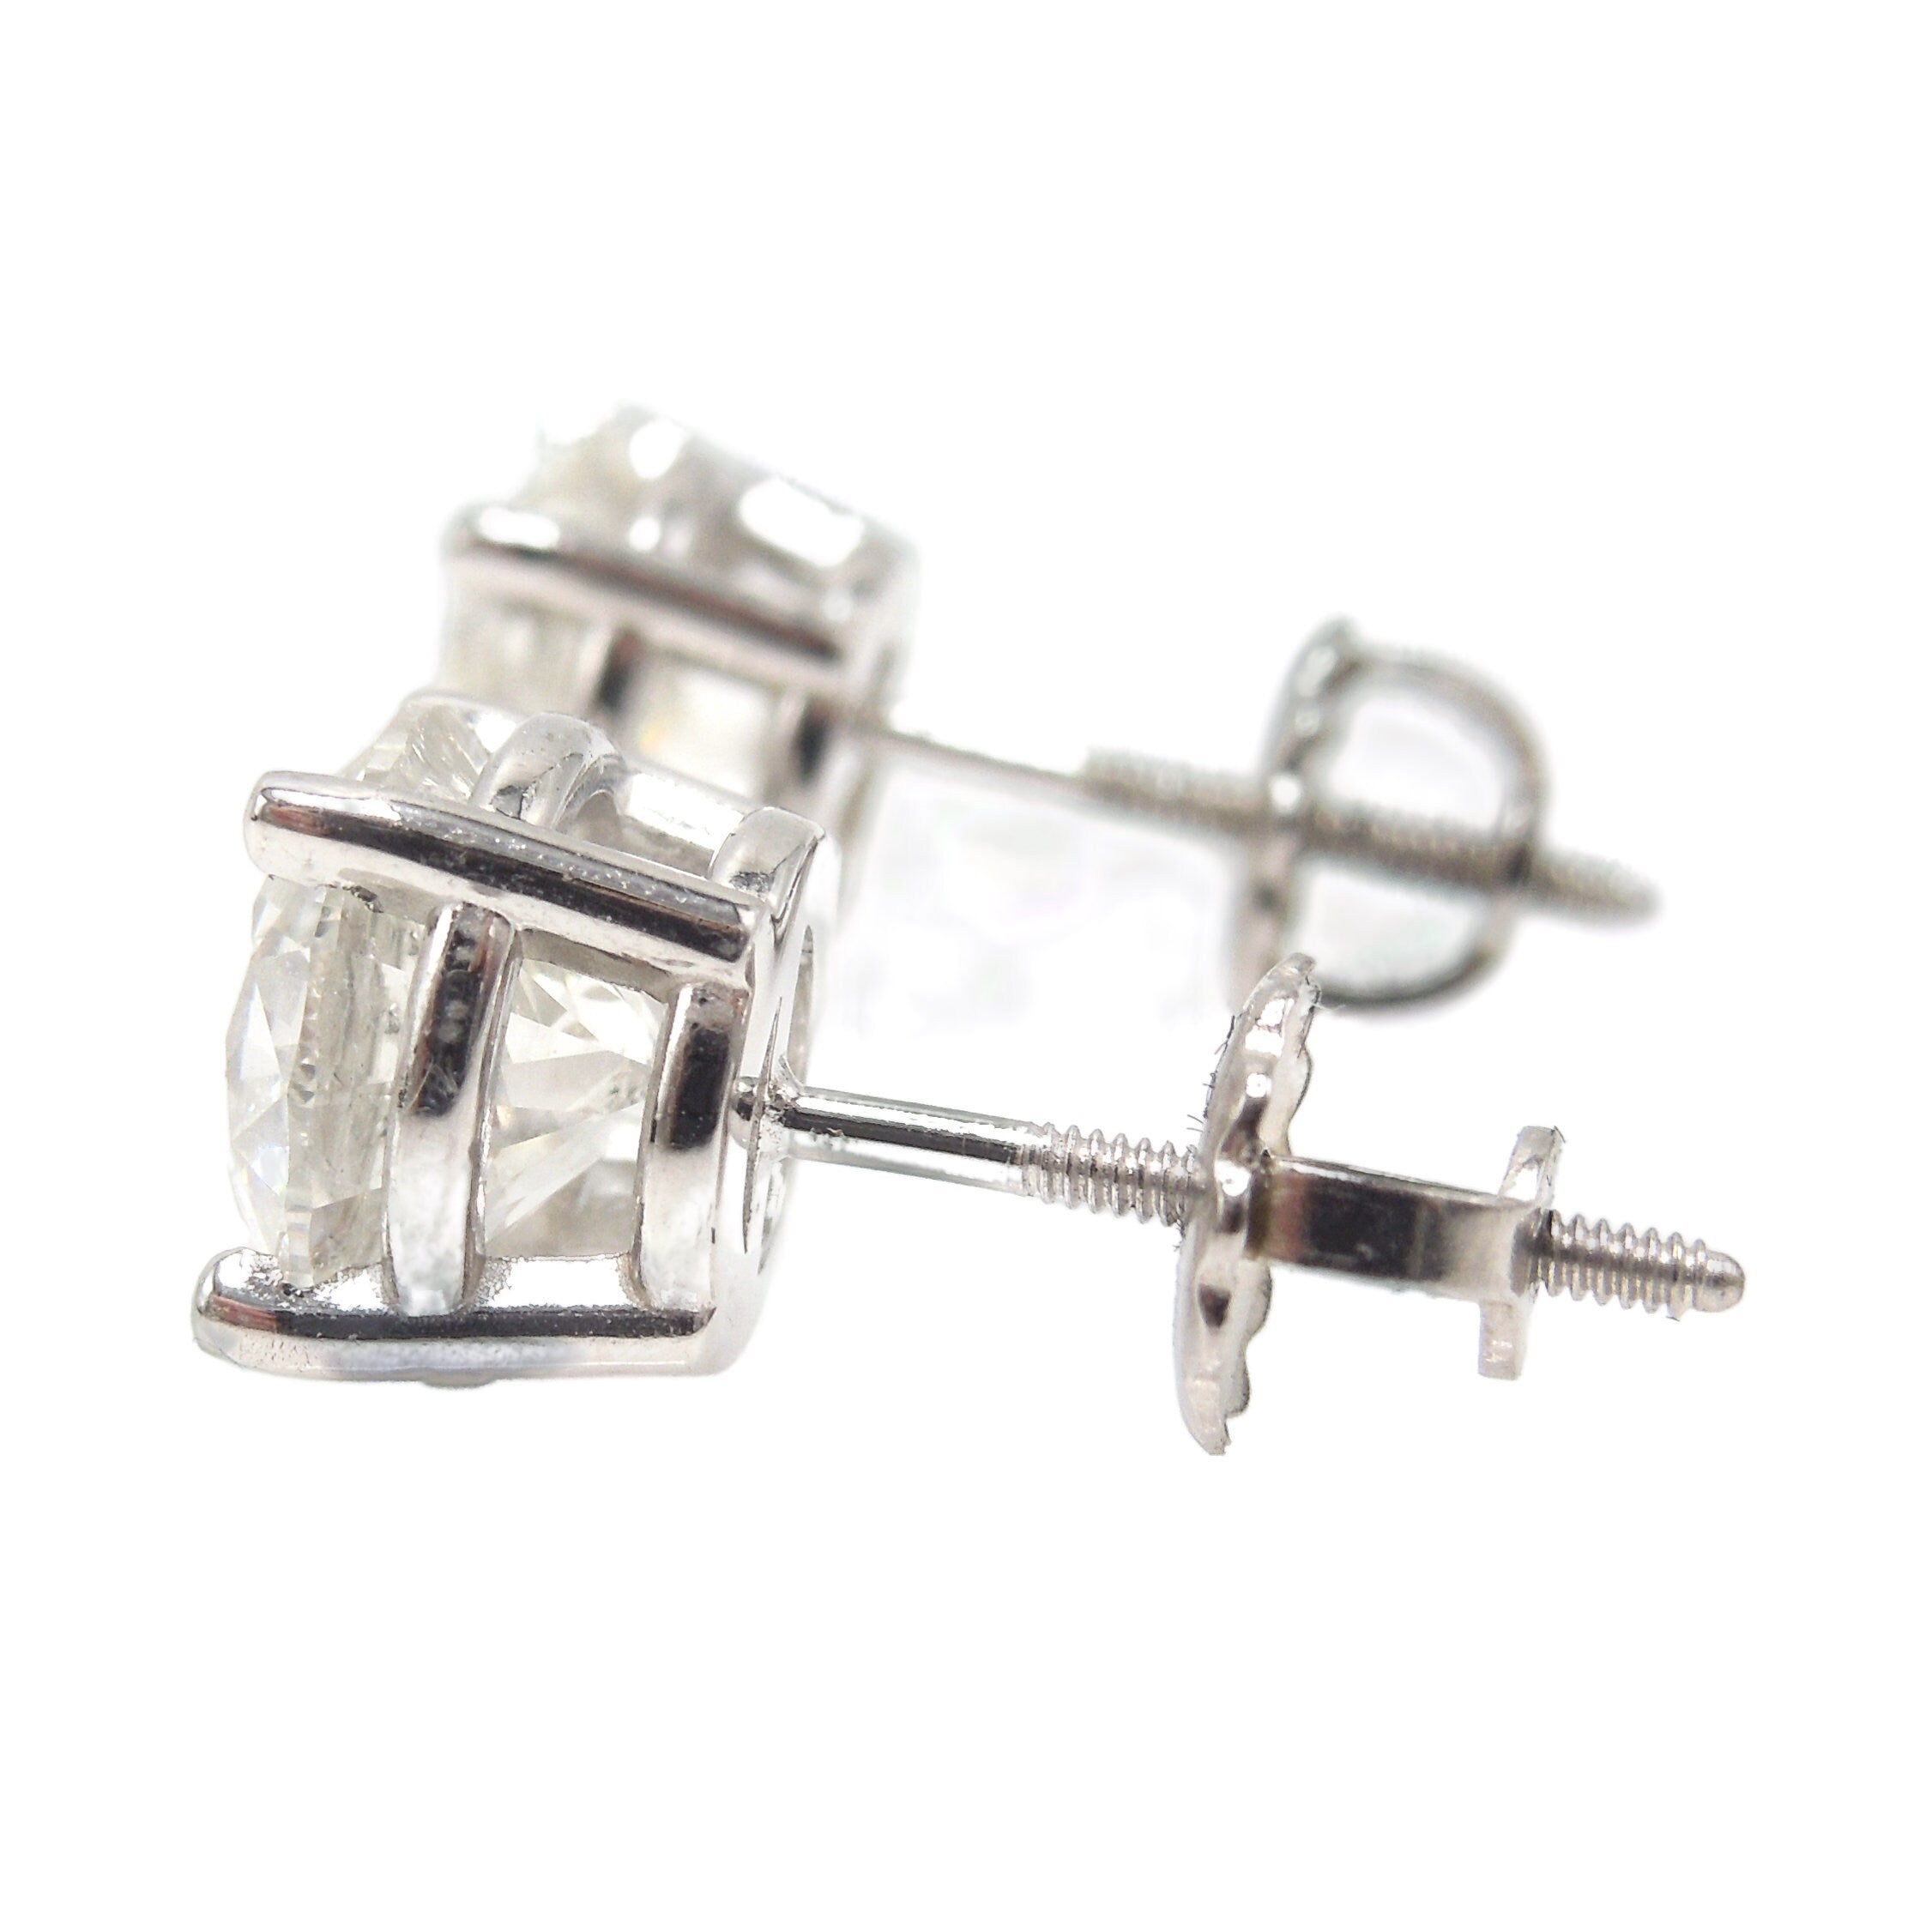 4.02ct Total Weight Diamond Stud Earrings in 14K White Gold Basket Setting